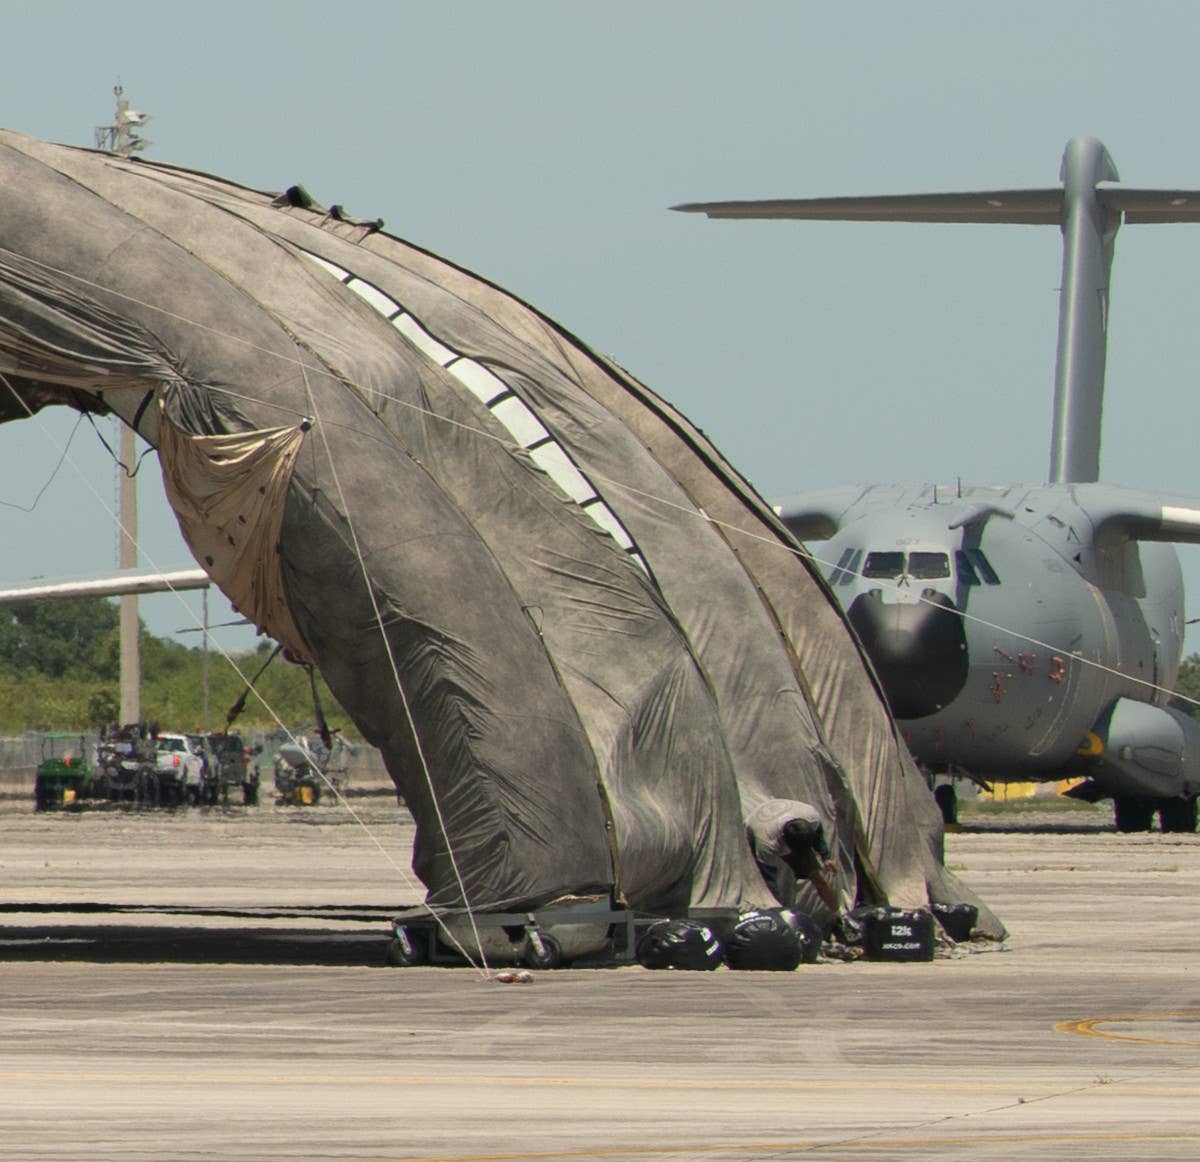 An Airbus A400M belonging to an unknown operator seen behind the "prototype portable camouflage, concealment, and deception hangar" at Homestead Air Reserve Base. <em>Air National Guard</em>